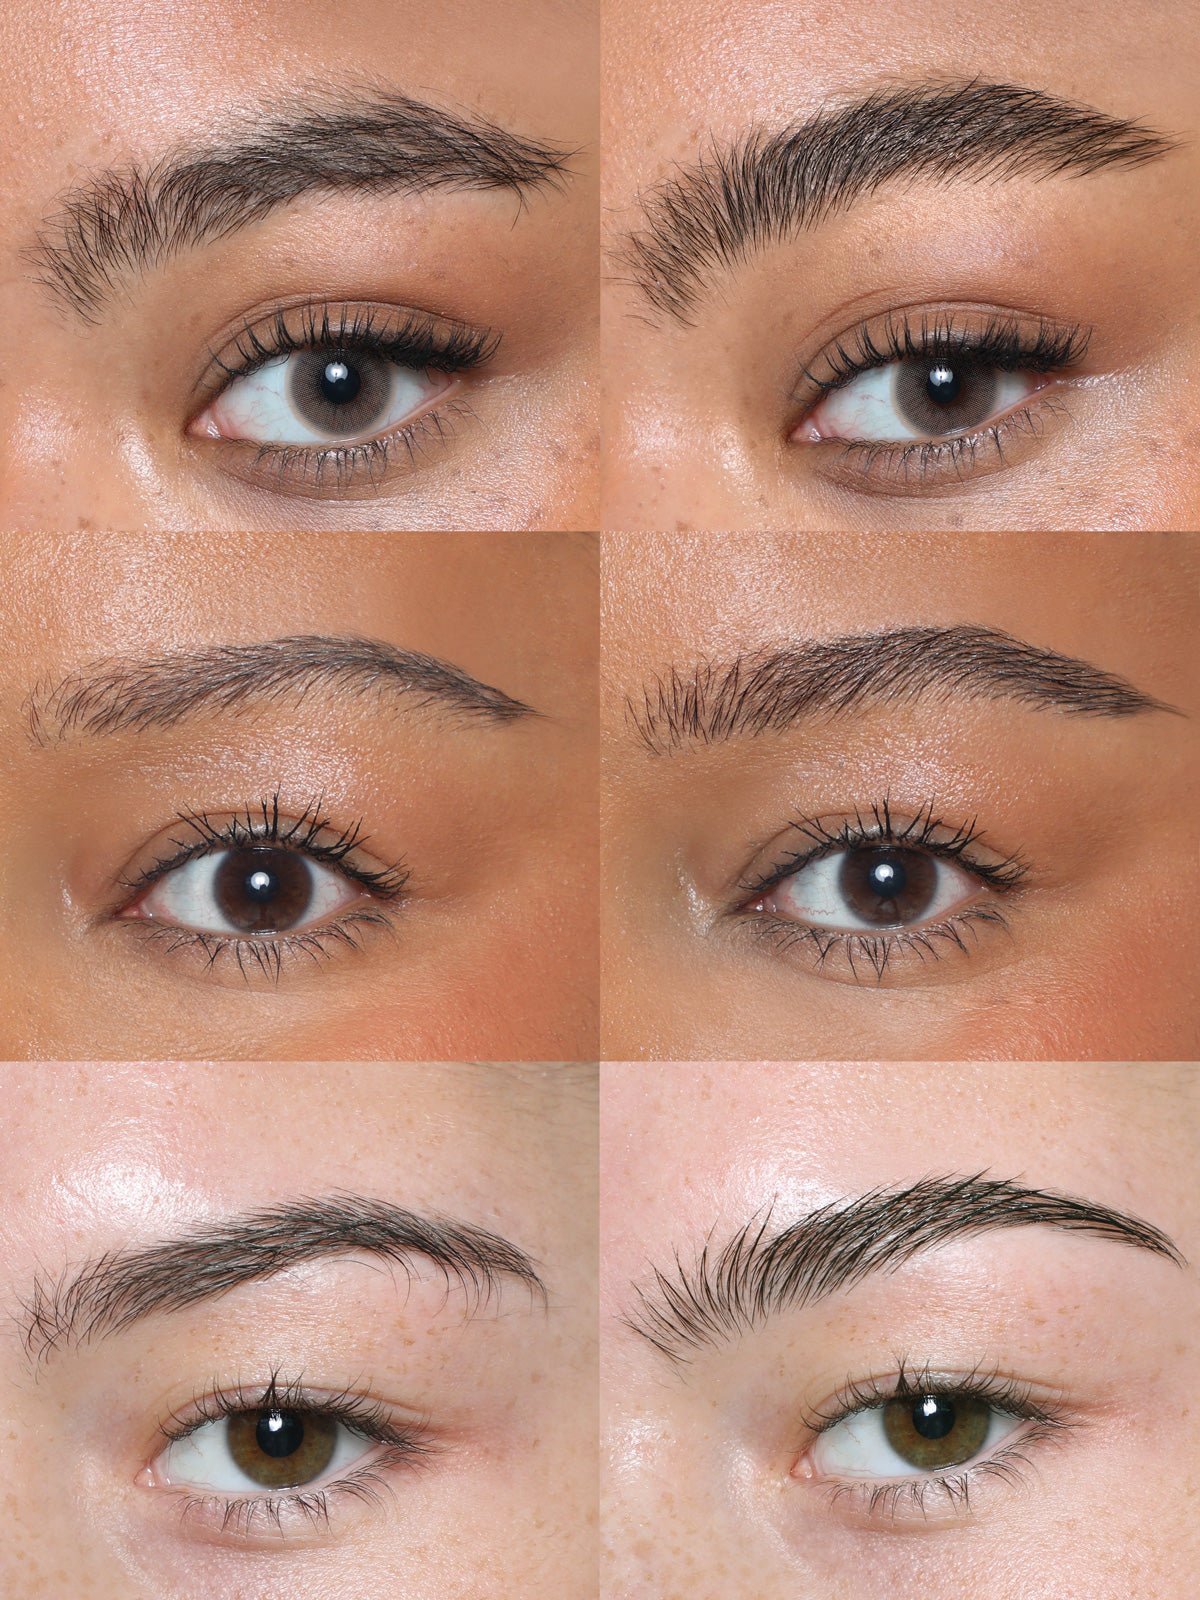 REFY Brow Tint in Deep Brown on Models Before & After